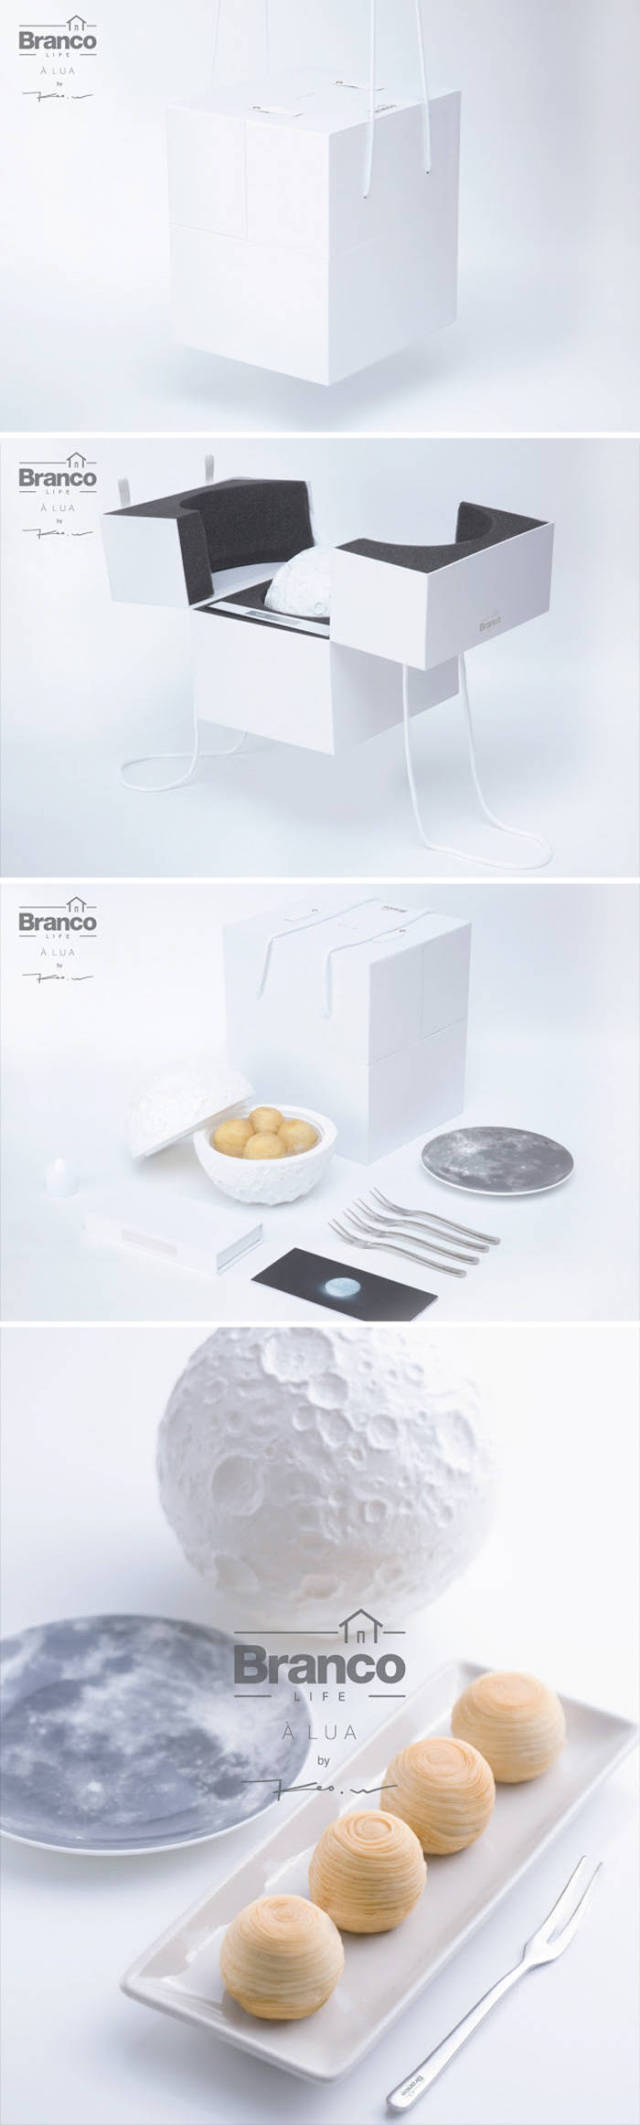 These Companies Make Sure Their Packaging Is A Work Of Art (47 pics)